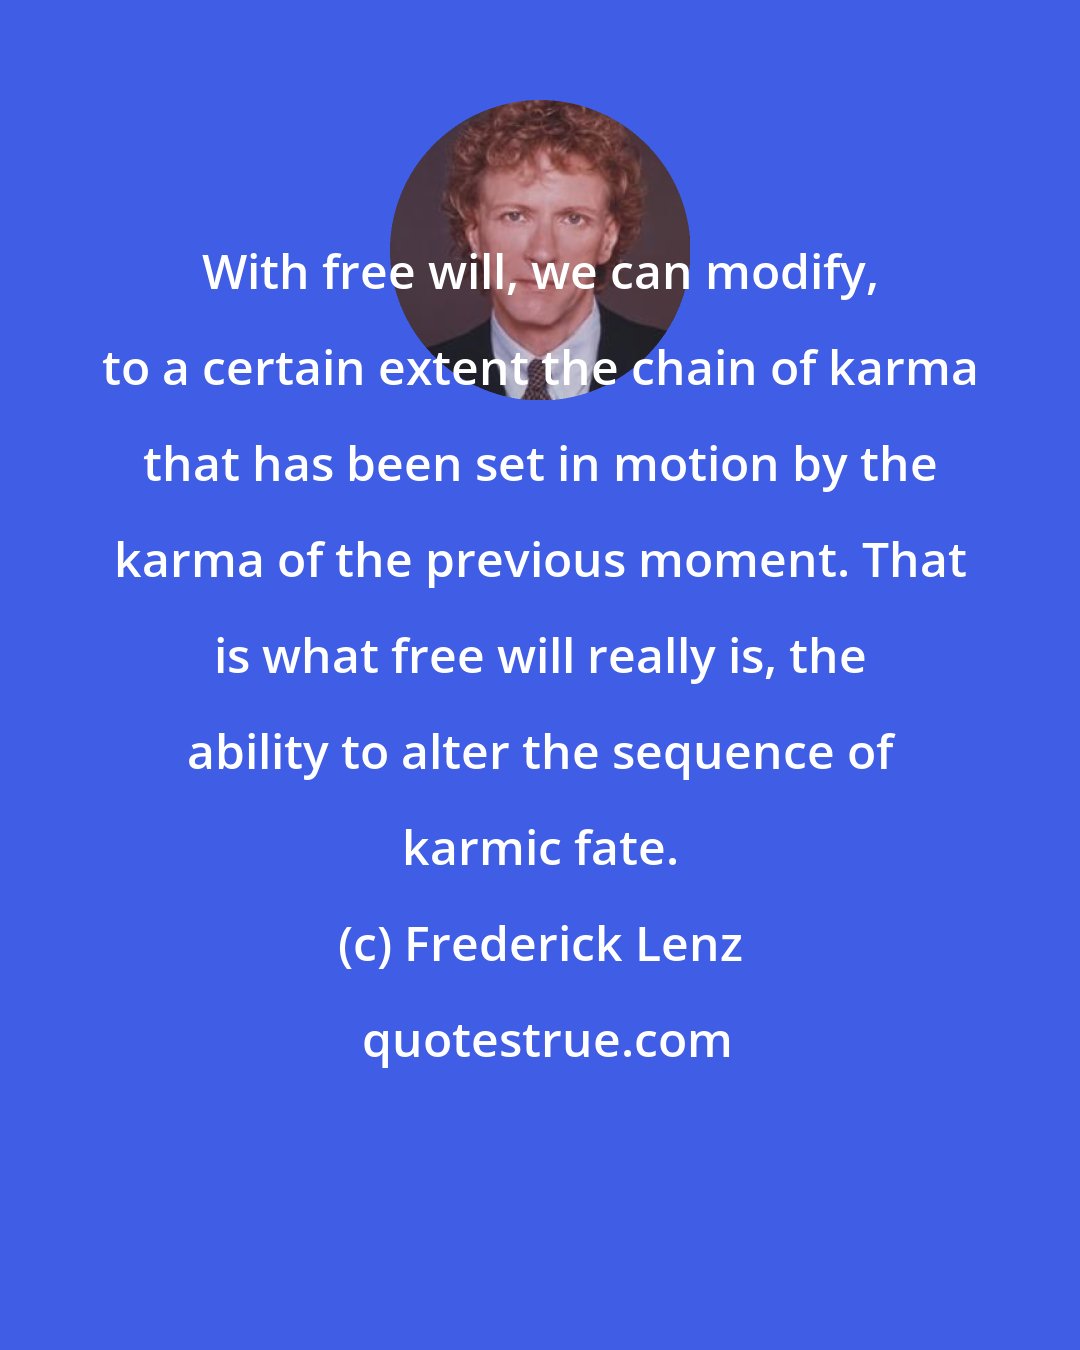 Frederick Lenz: With free will, we can modify, to a certain extent the chain of karma that has been set in motion by the karma of the previous moment. That is what free will really is, the ability to alter the sequence of karmic fate.